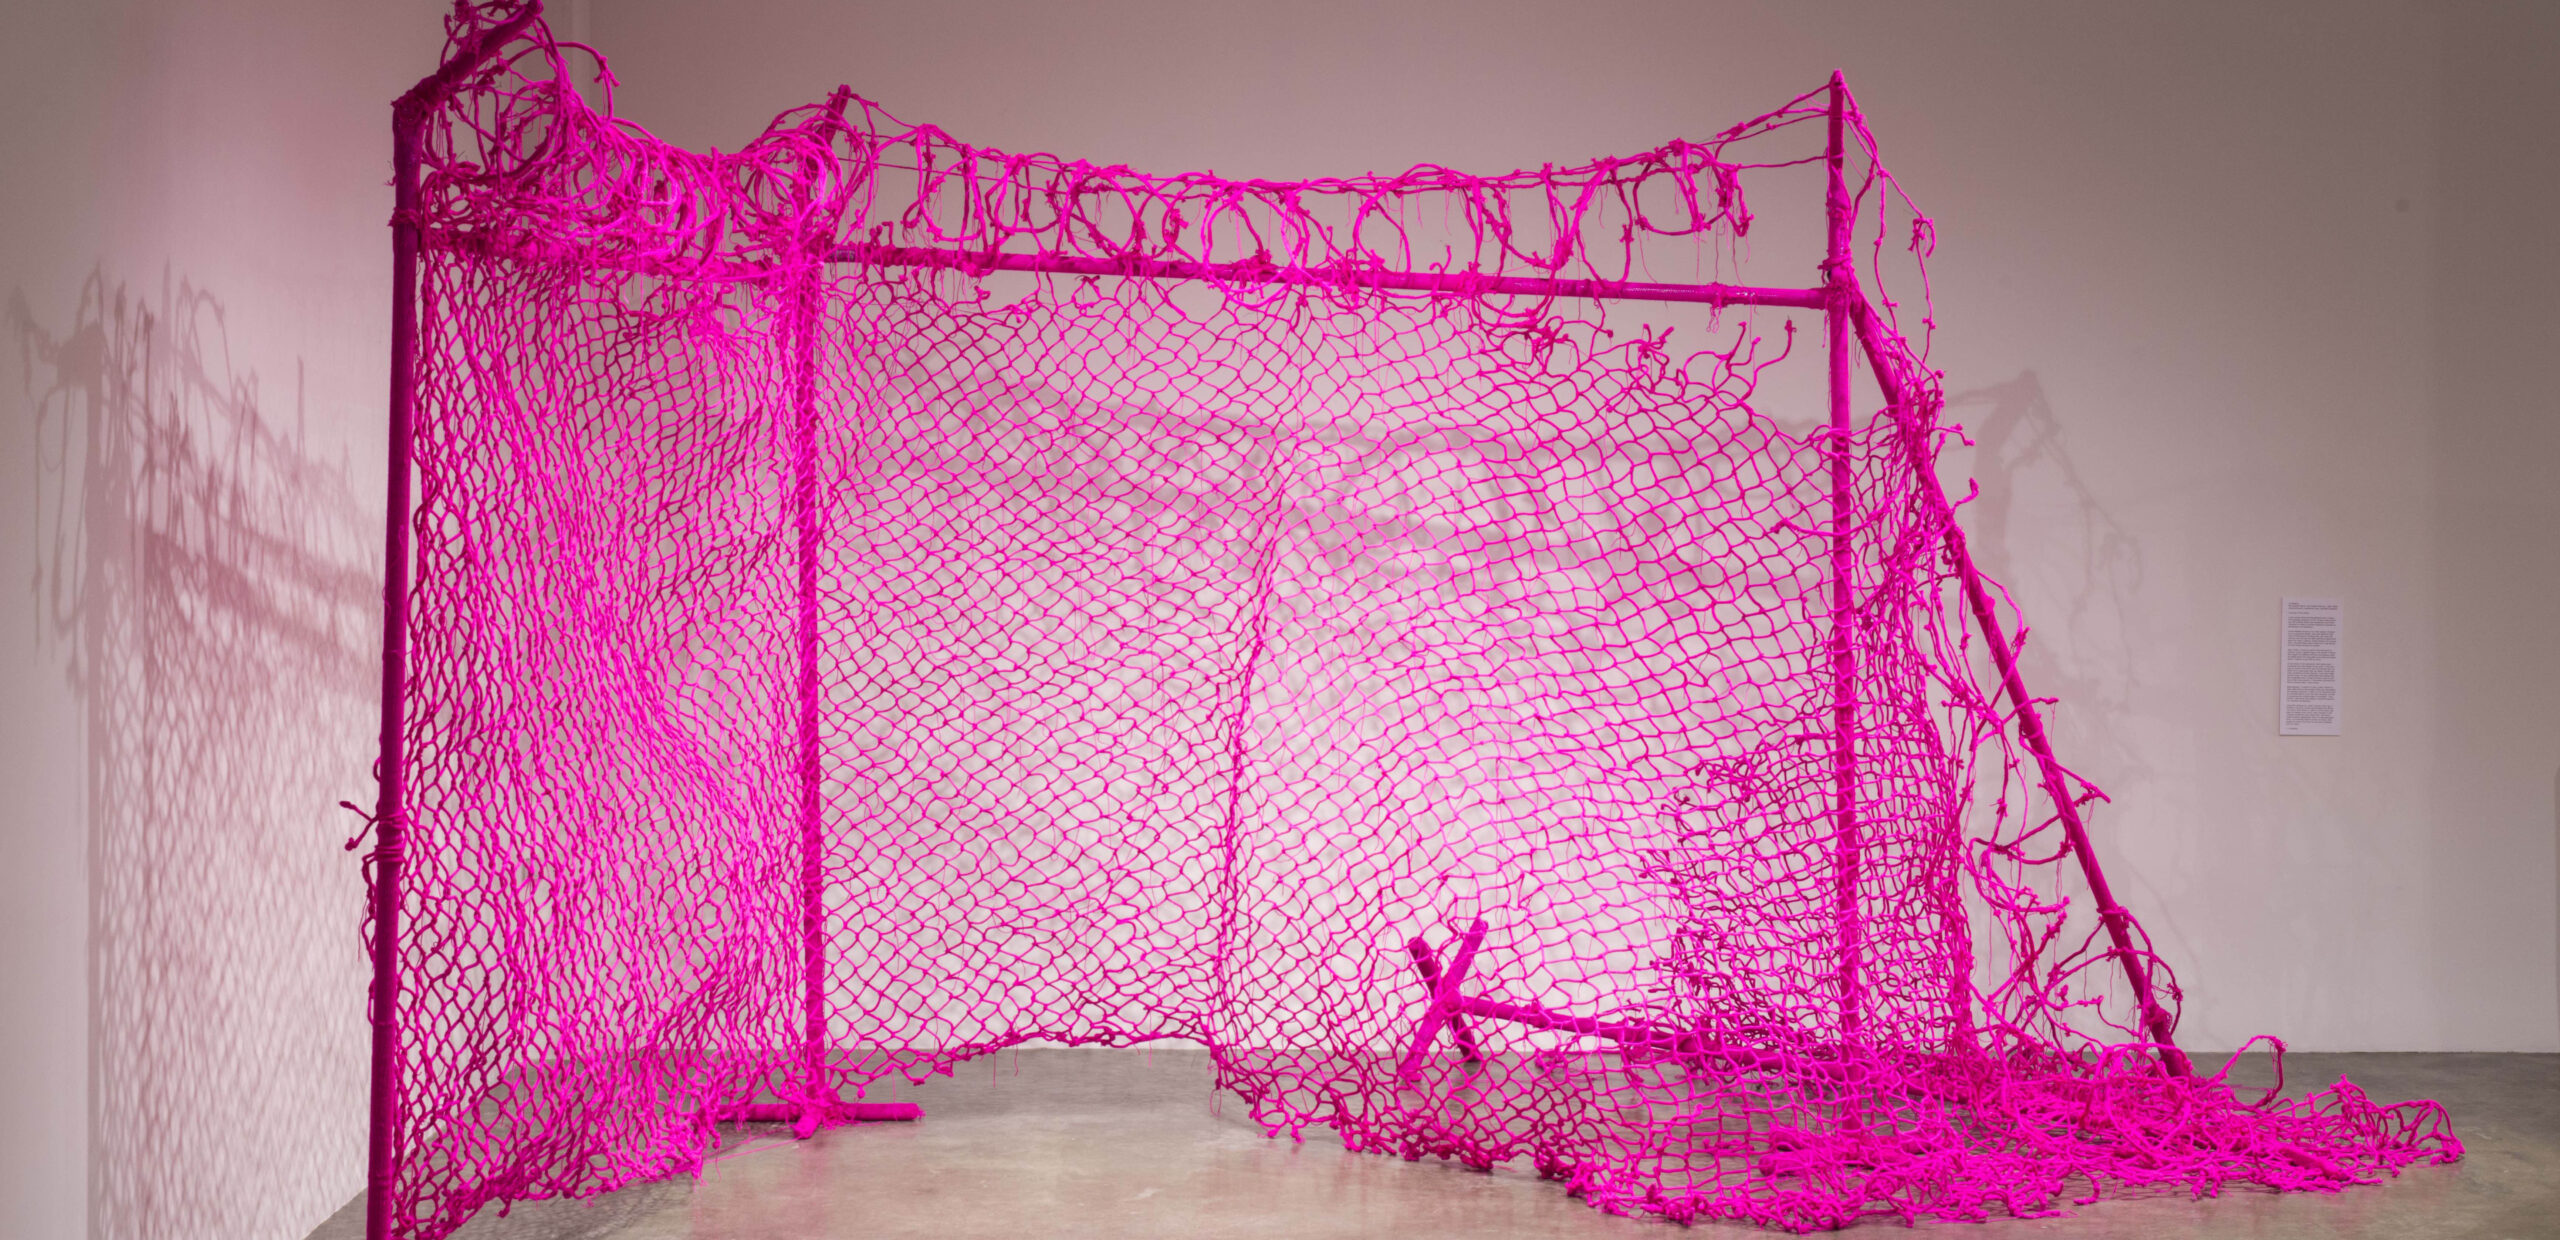 Large scale barbed wire fence made of hot pink yarn